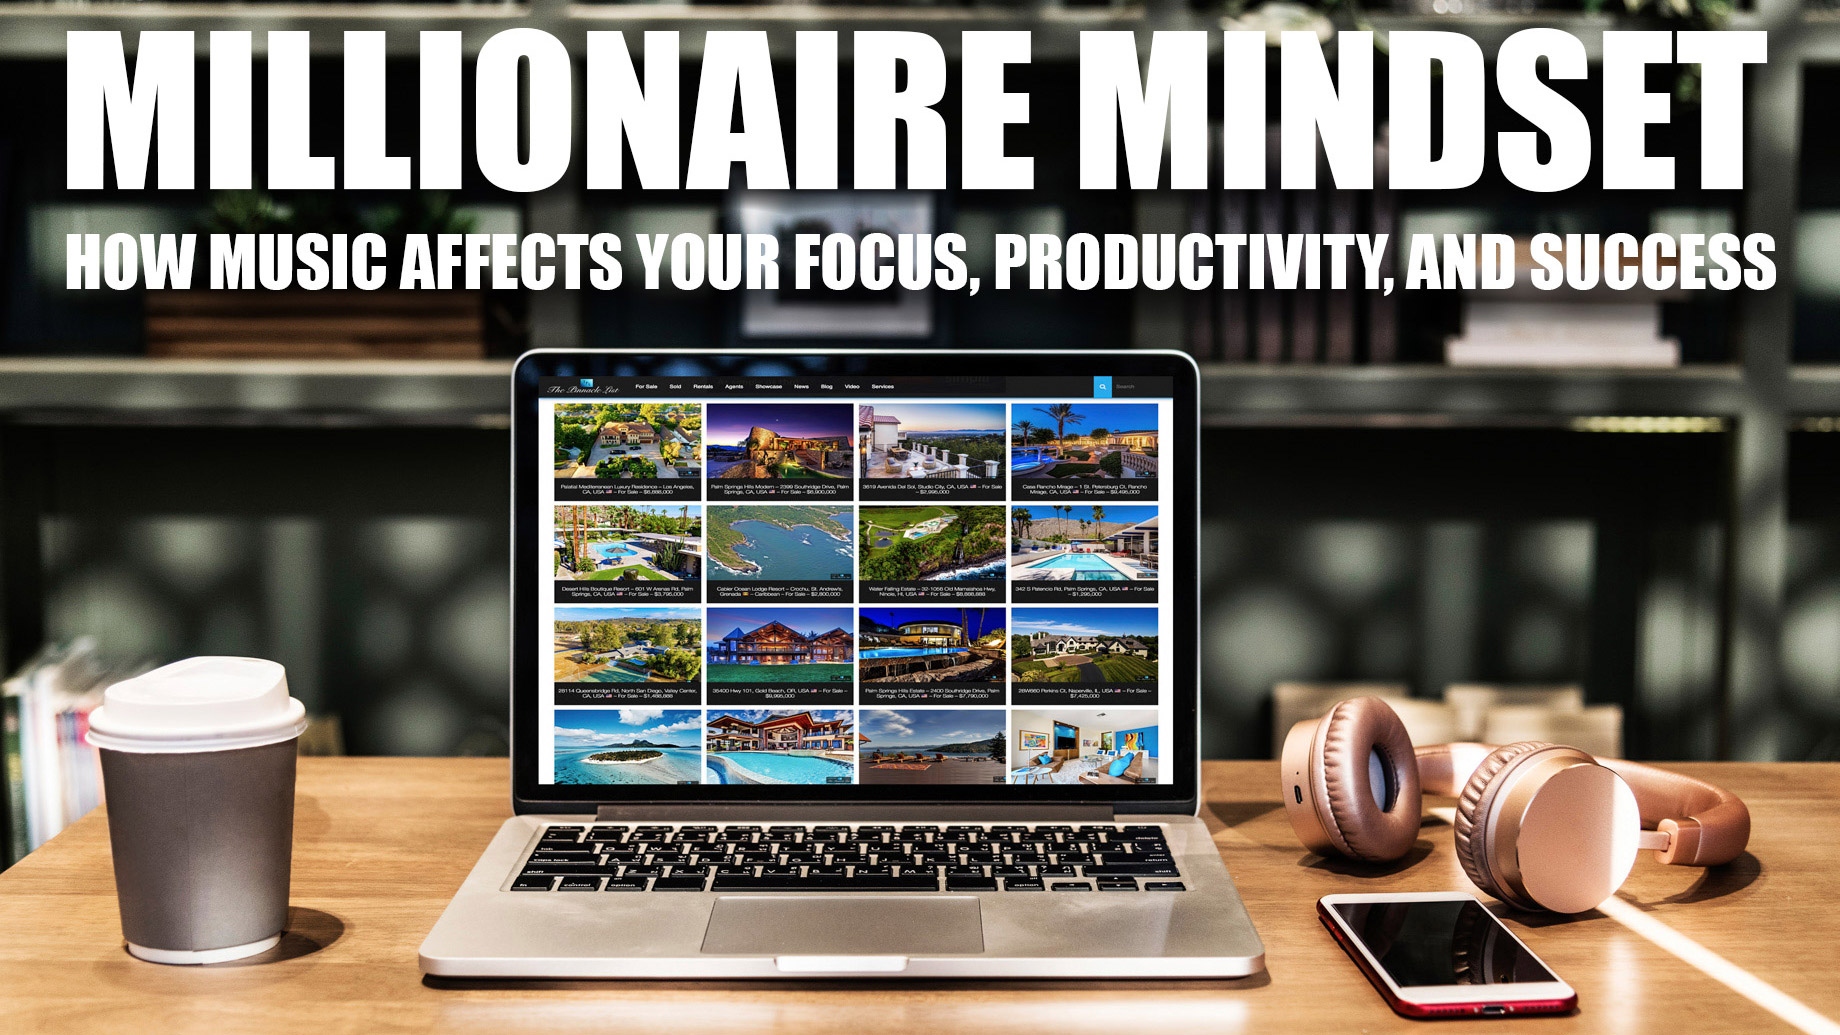 Millionaire Mindset – How Music Affects Your Focus, Productivity, and Success